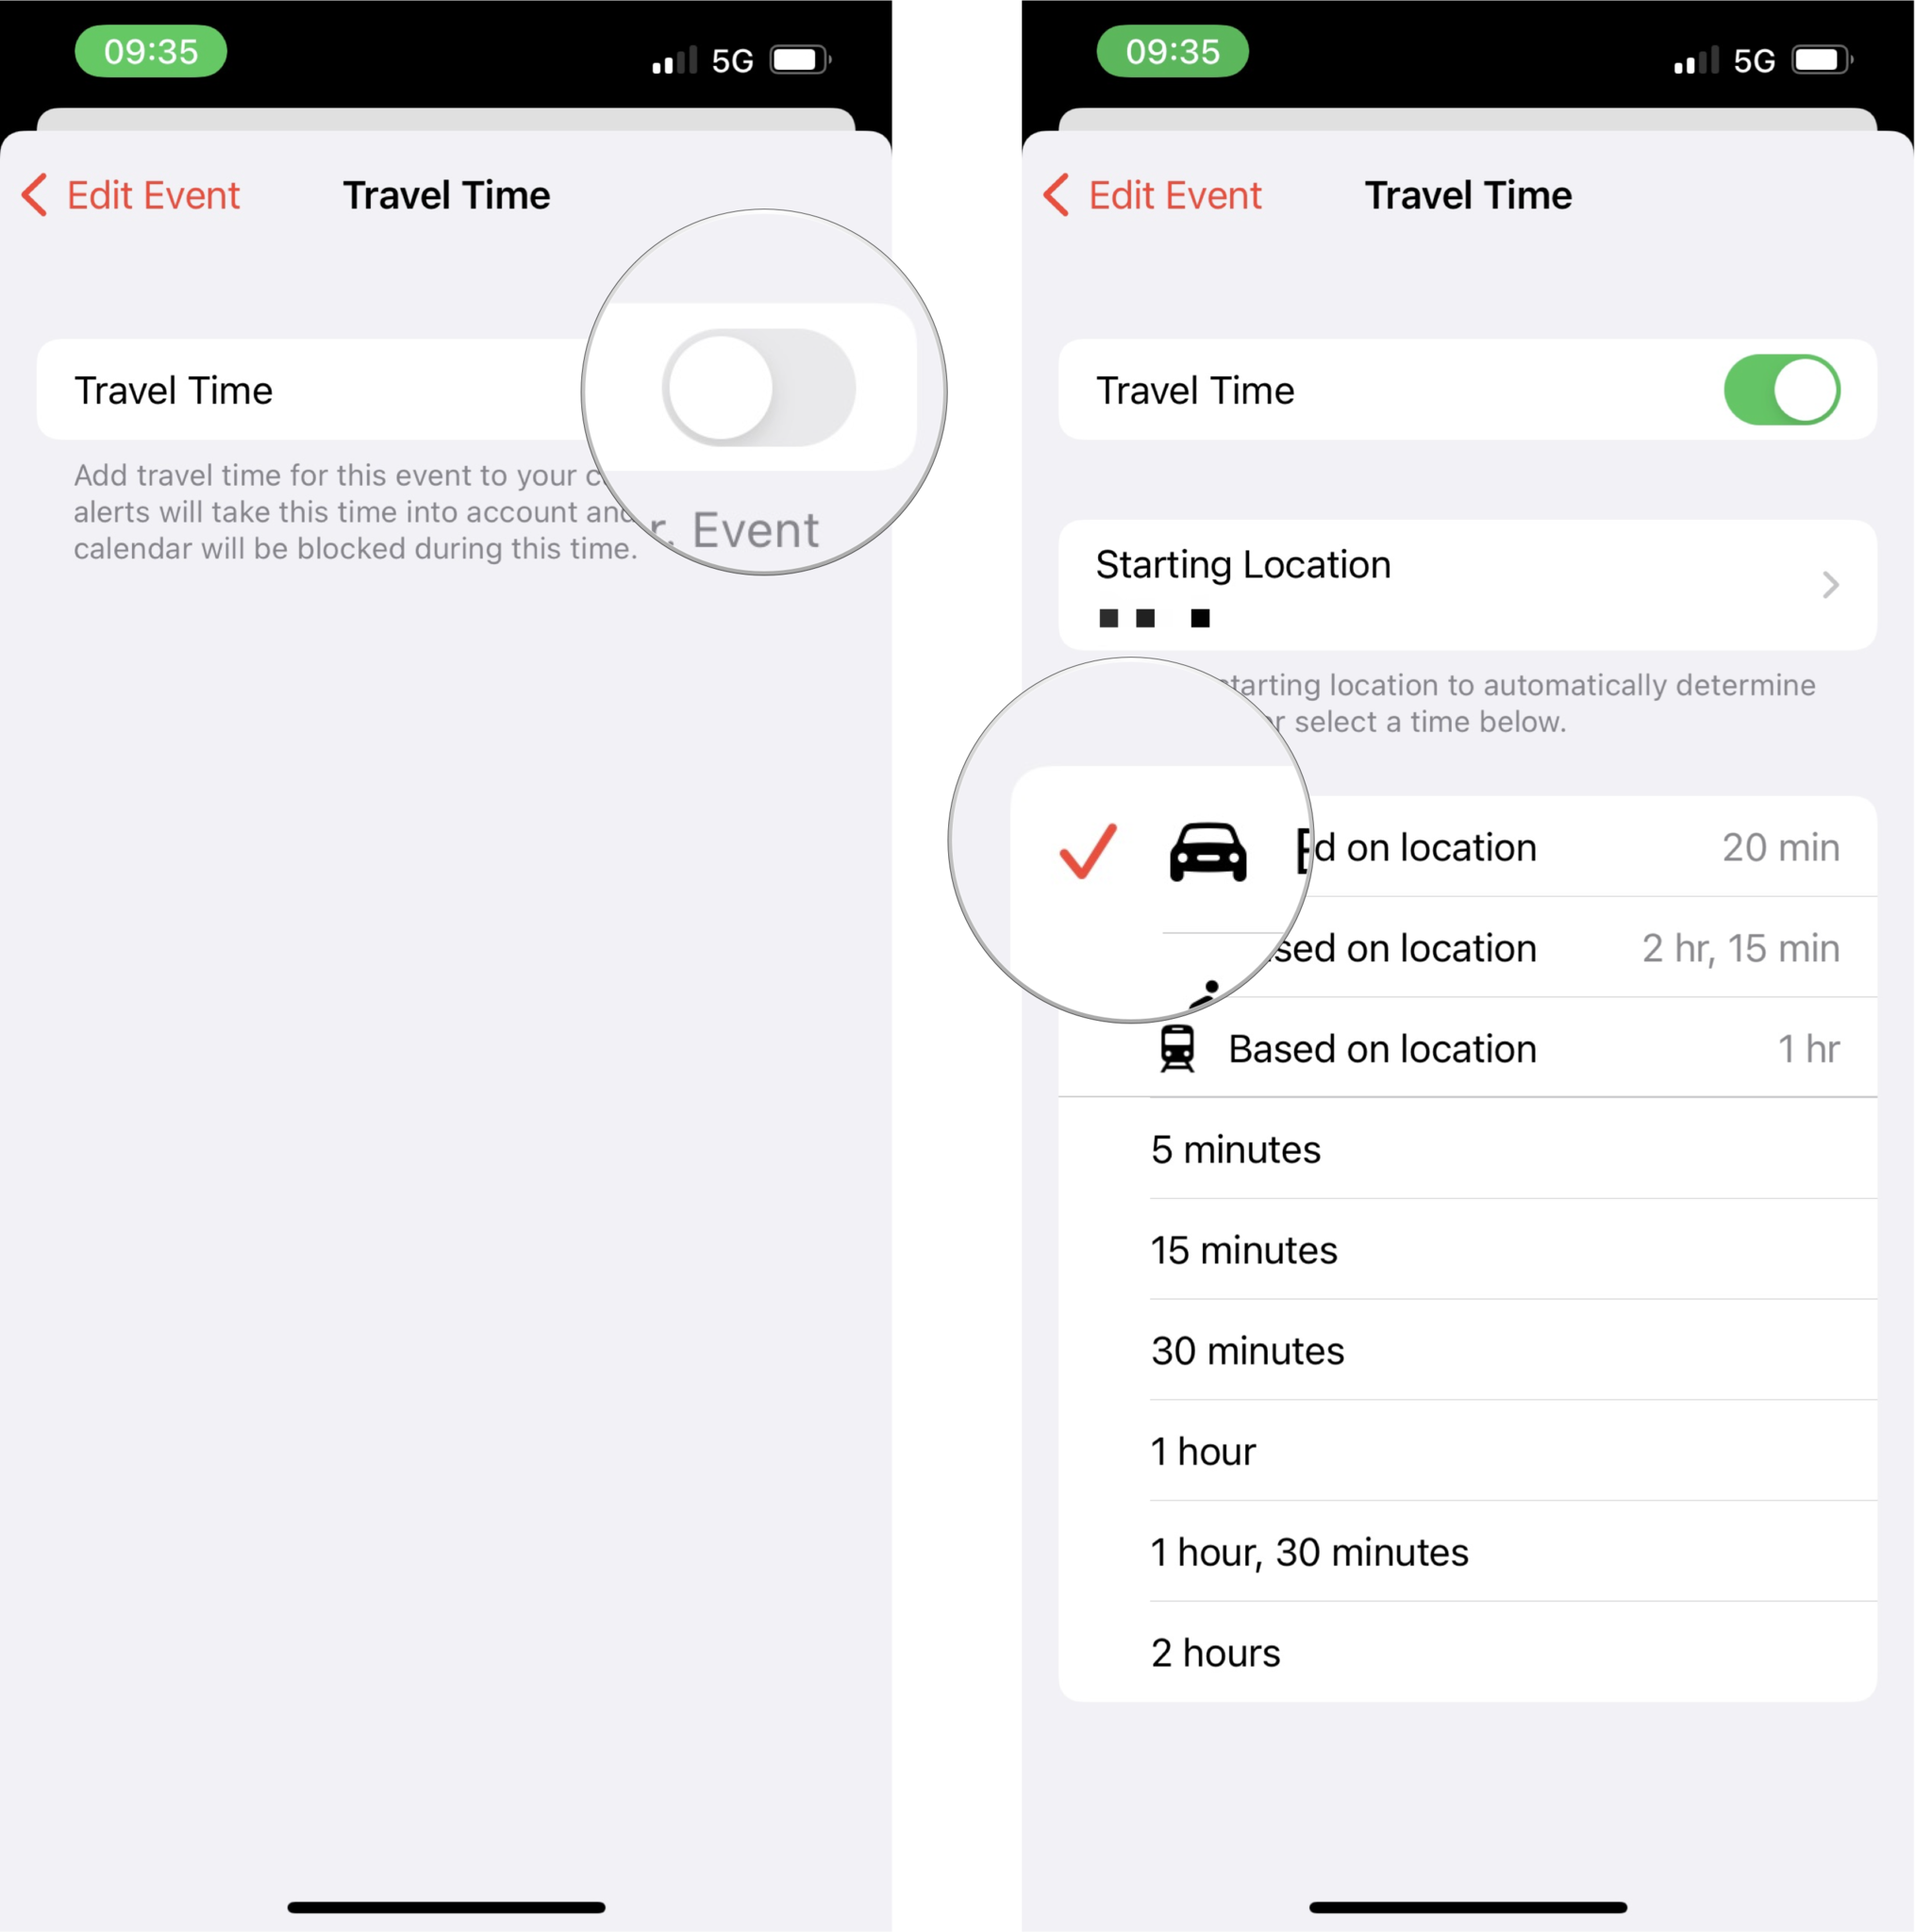 How to get travel times for calender events: Turn Travel Time on, check the starting location is correct, and then tap on Based on location for driving, walking, or transit